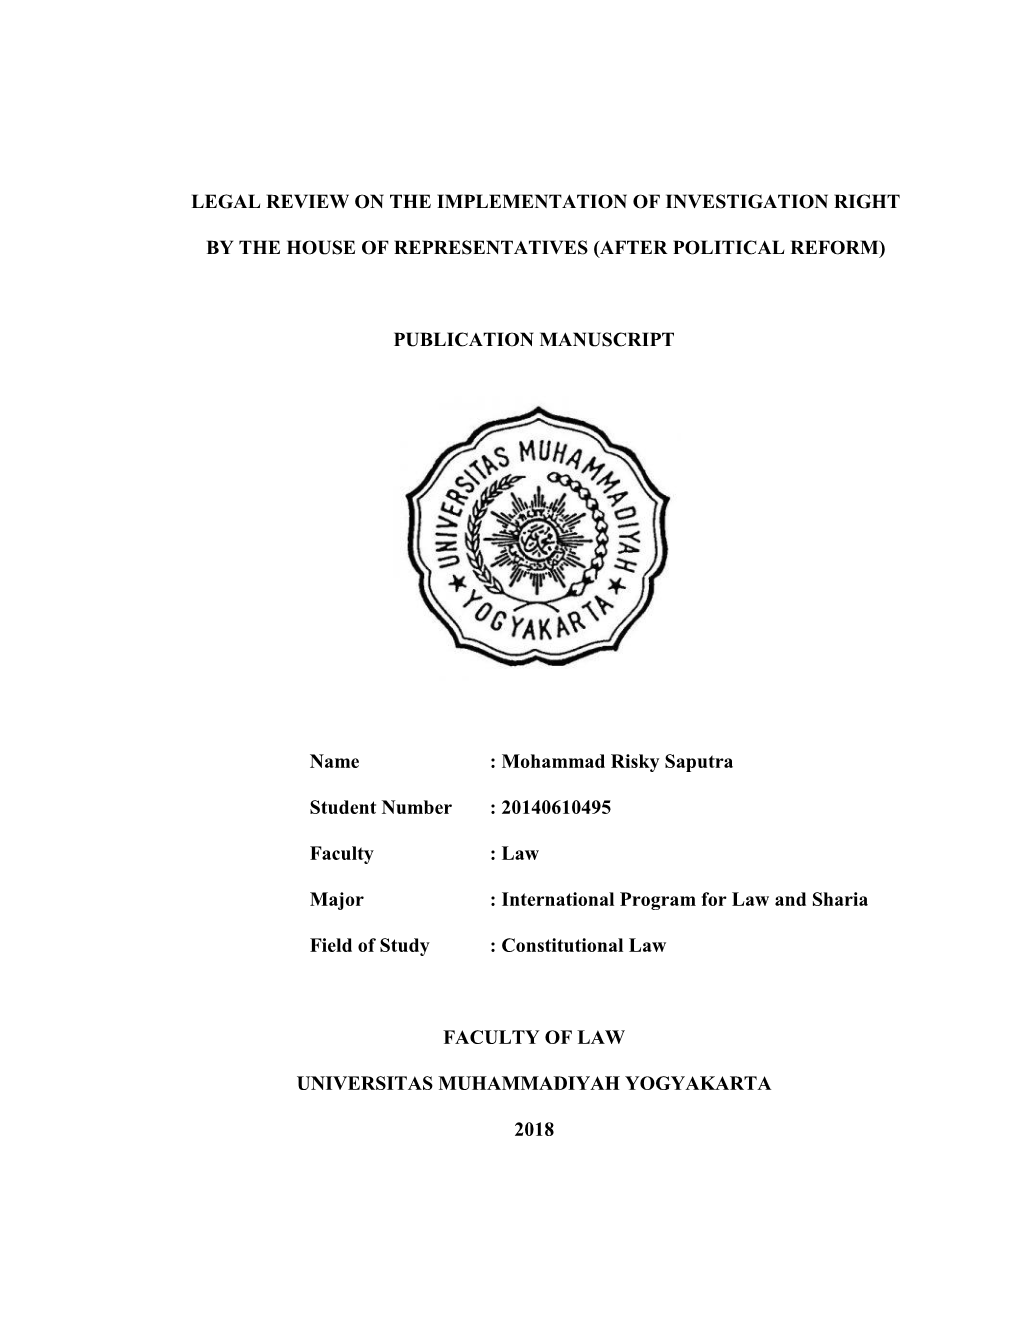 Legal Review on the Implementation of Investigation Right